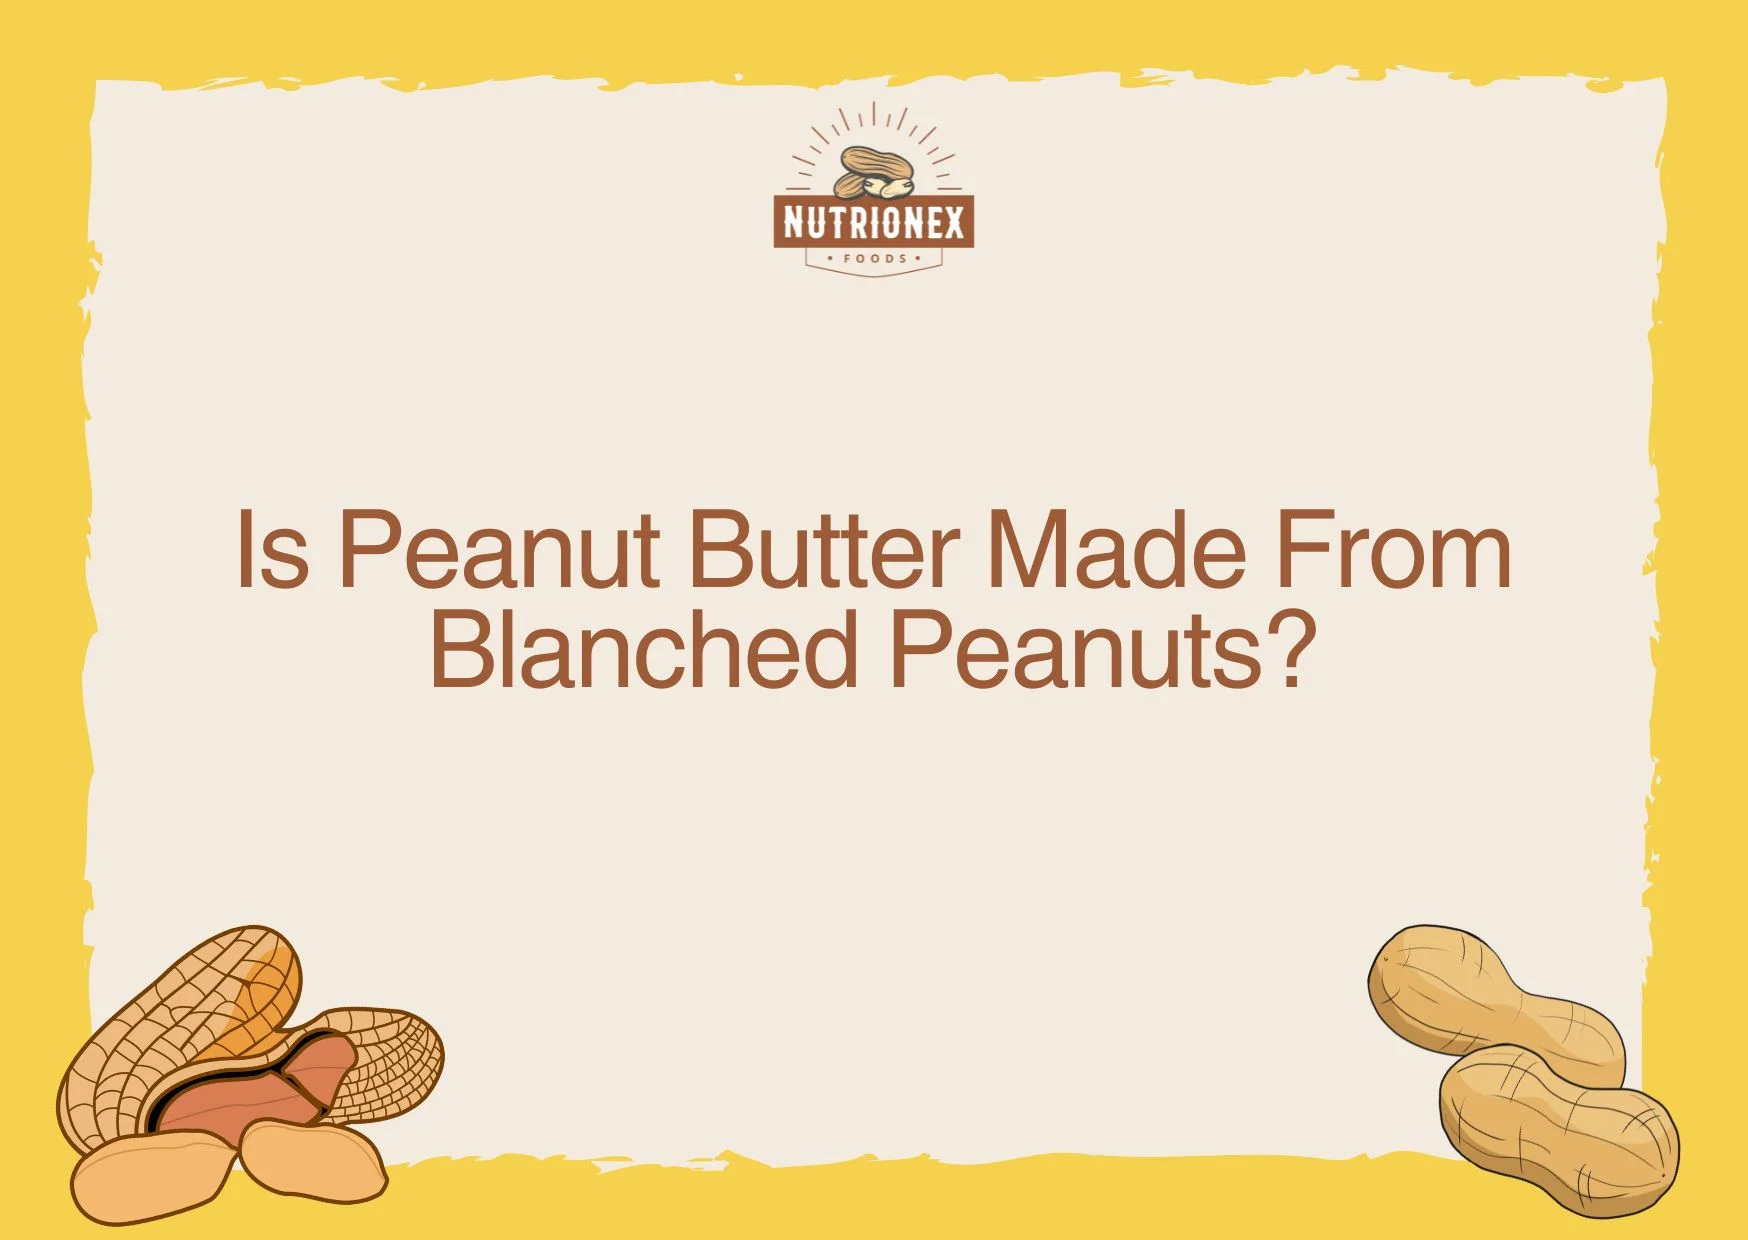 Is Peanut Butter Made From Blanched Peanuts?